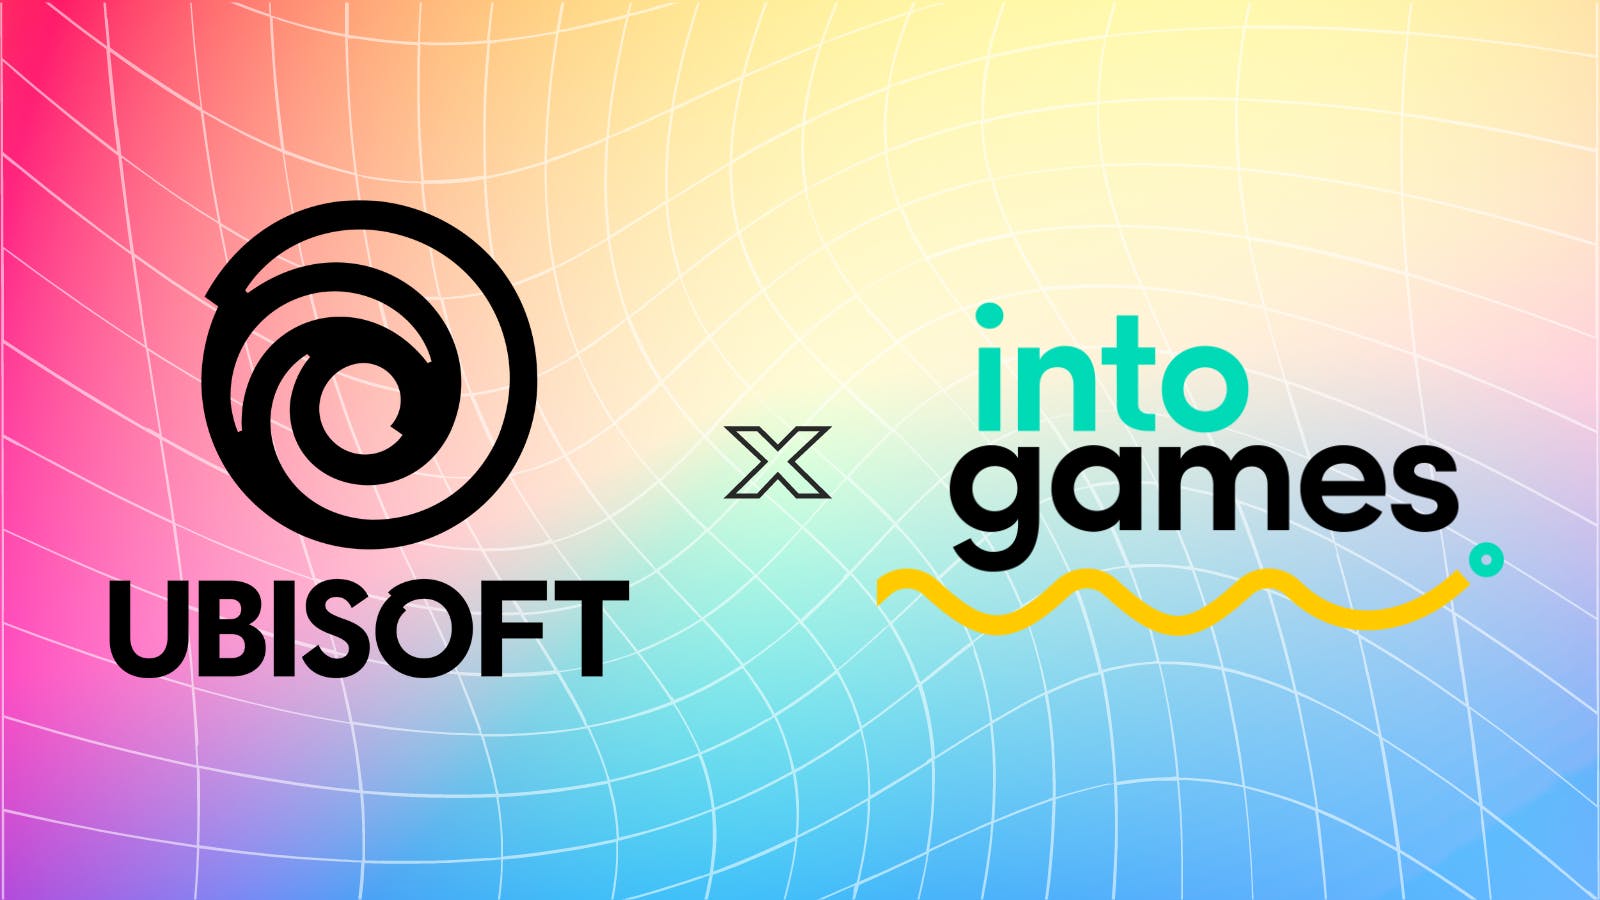 Ubisoft UK are joining as Into Games Industry Partners